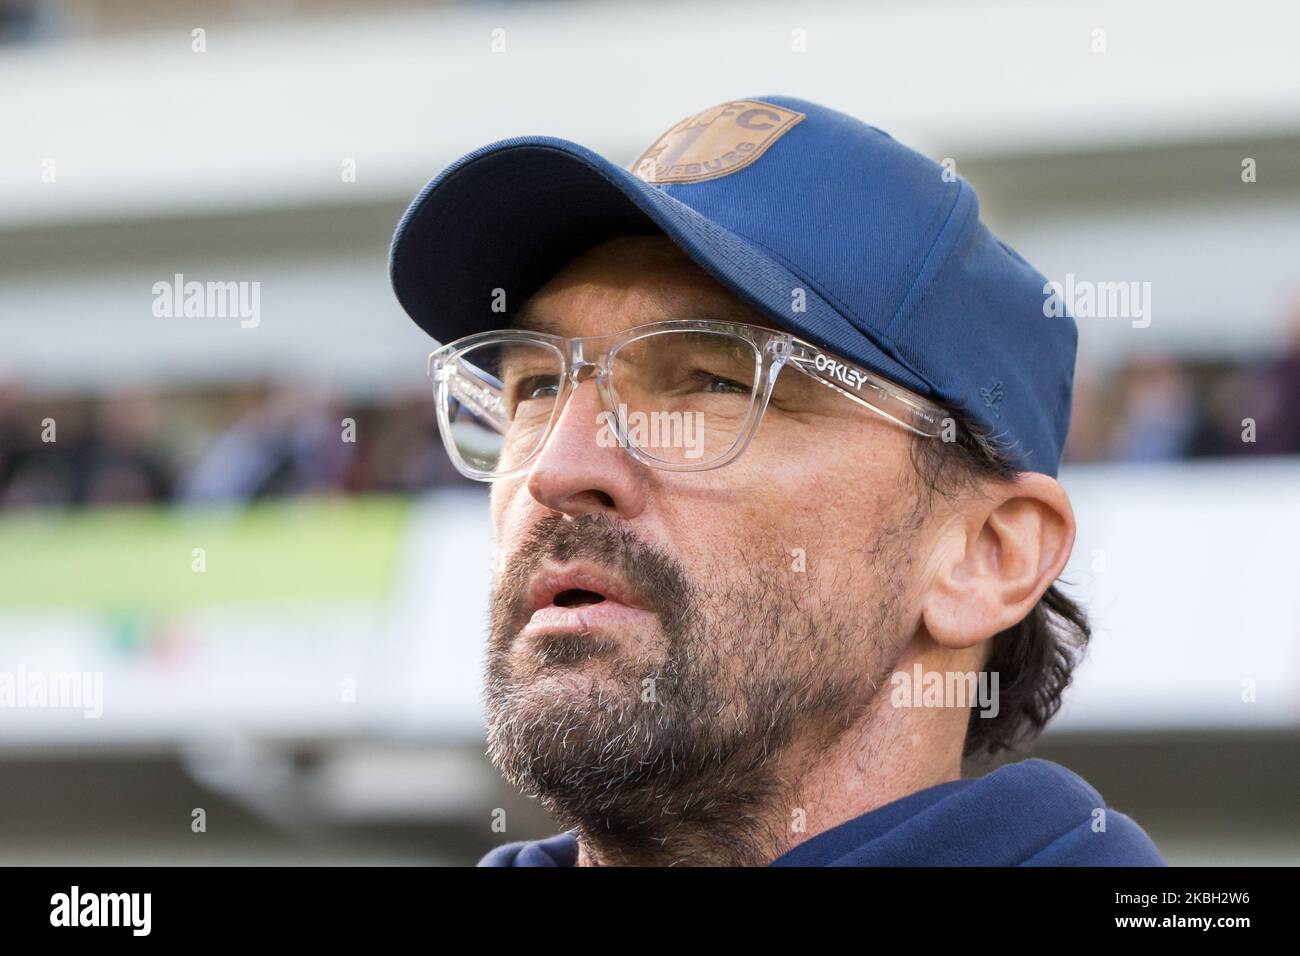 Claus-Dieter Wollitz, head coach of Magdeburg looks on prior to the 3. Bundesliga match between 1. FC Magdeburg and Chemnitzer FC at the MDCC-Arena on February 15, 2020 in Magdeburg, Germany. (Photo by Peter Niedung/NurPhoto) Stock Photo